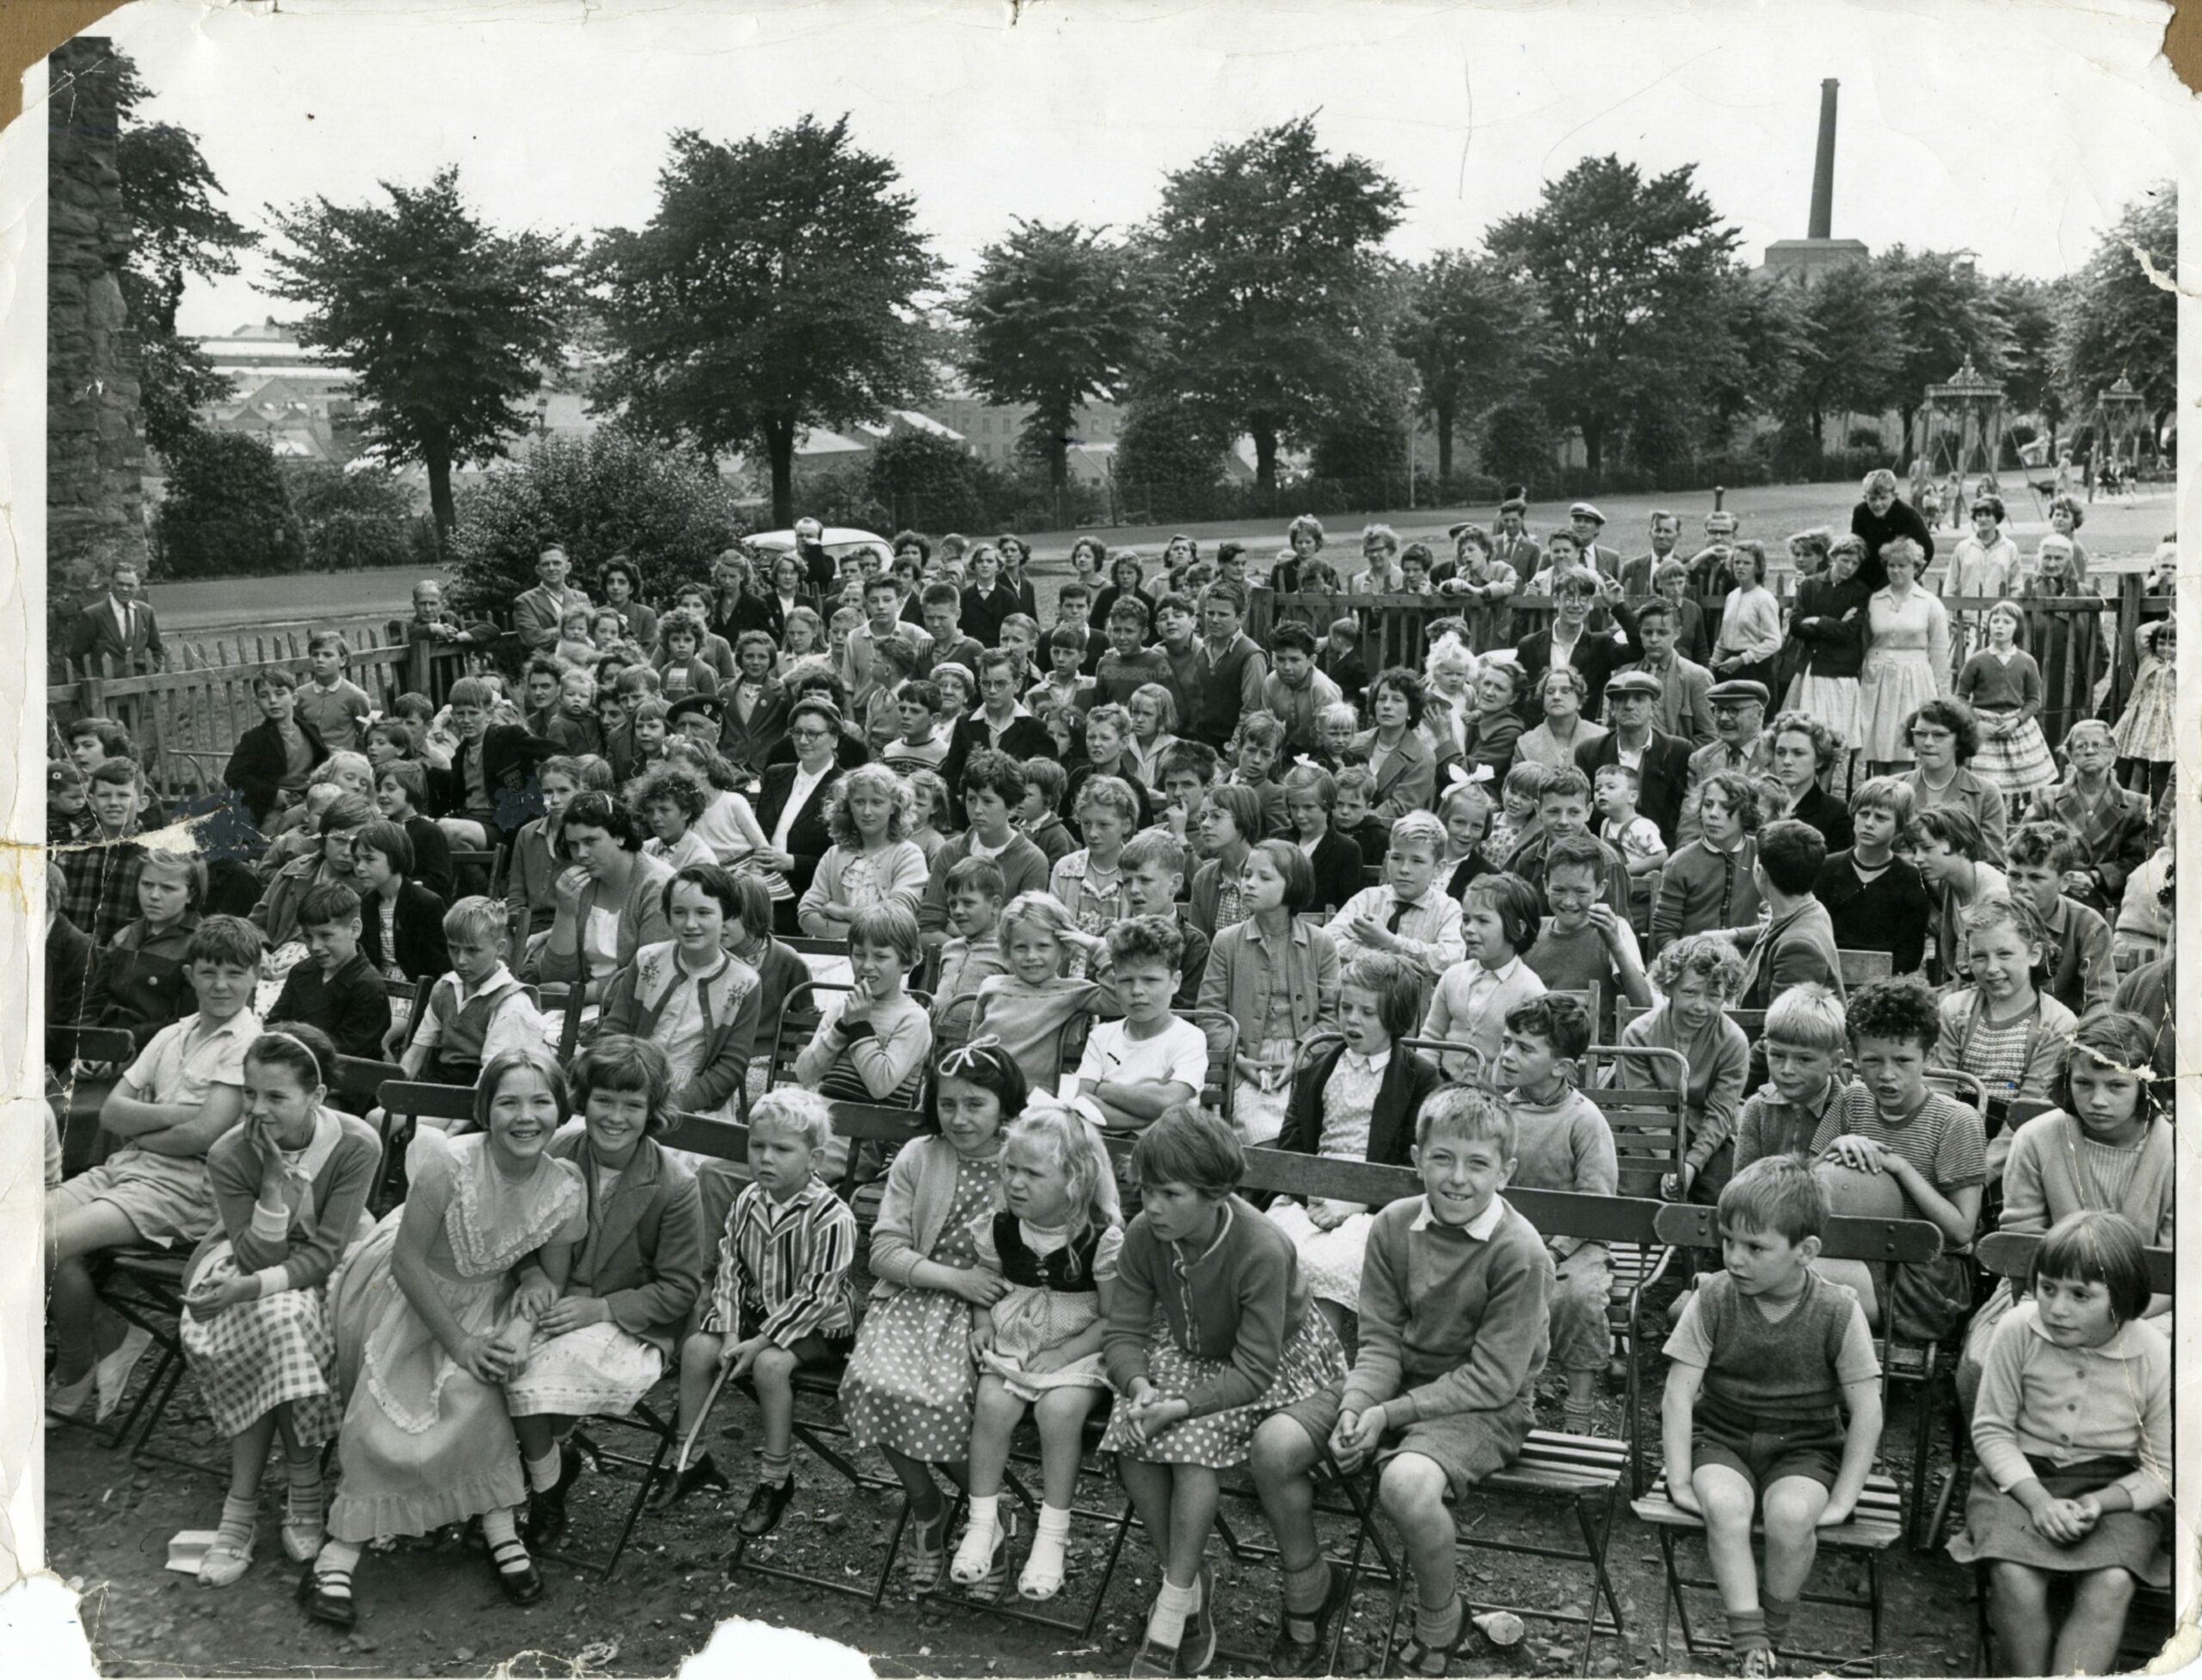 A crowd of children sitting down at an event in Dudhope Park in 1960